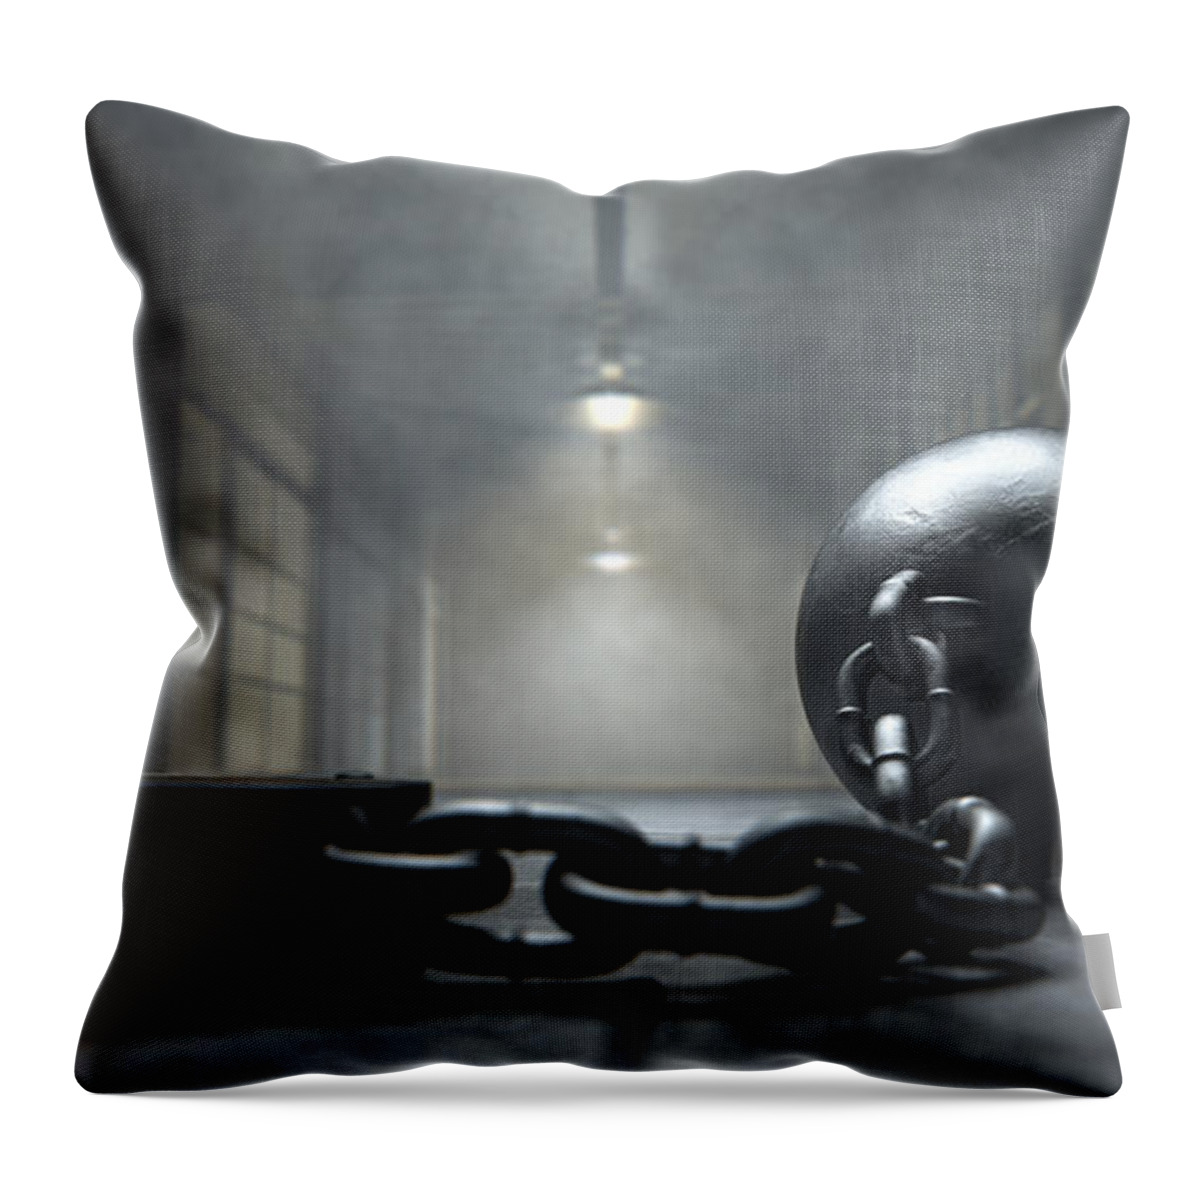 Chain Throw Pillow featuring the digital art Ball And Chain In Prison #1 by Allan Swart